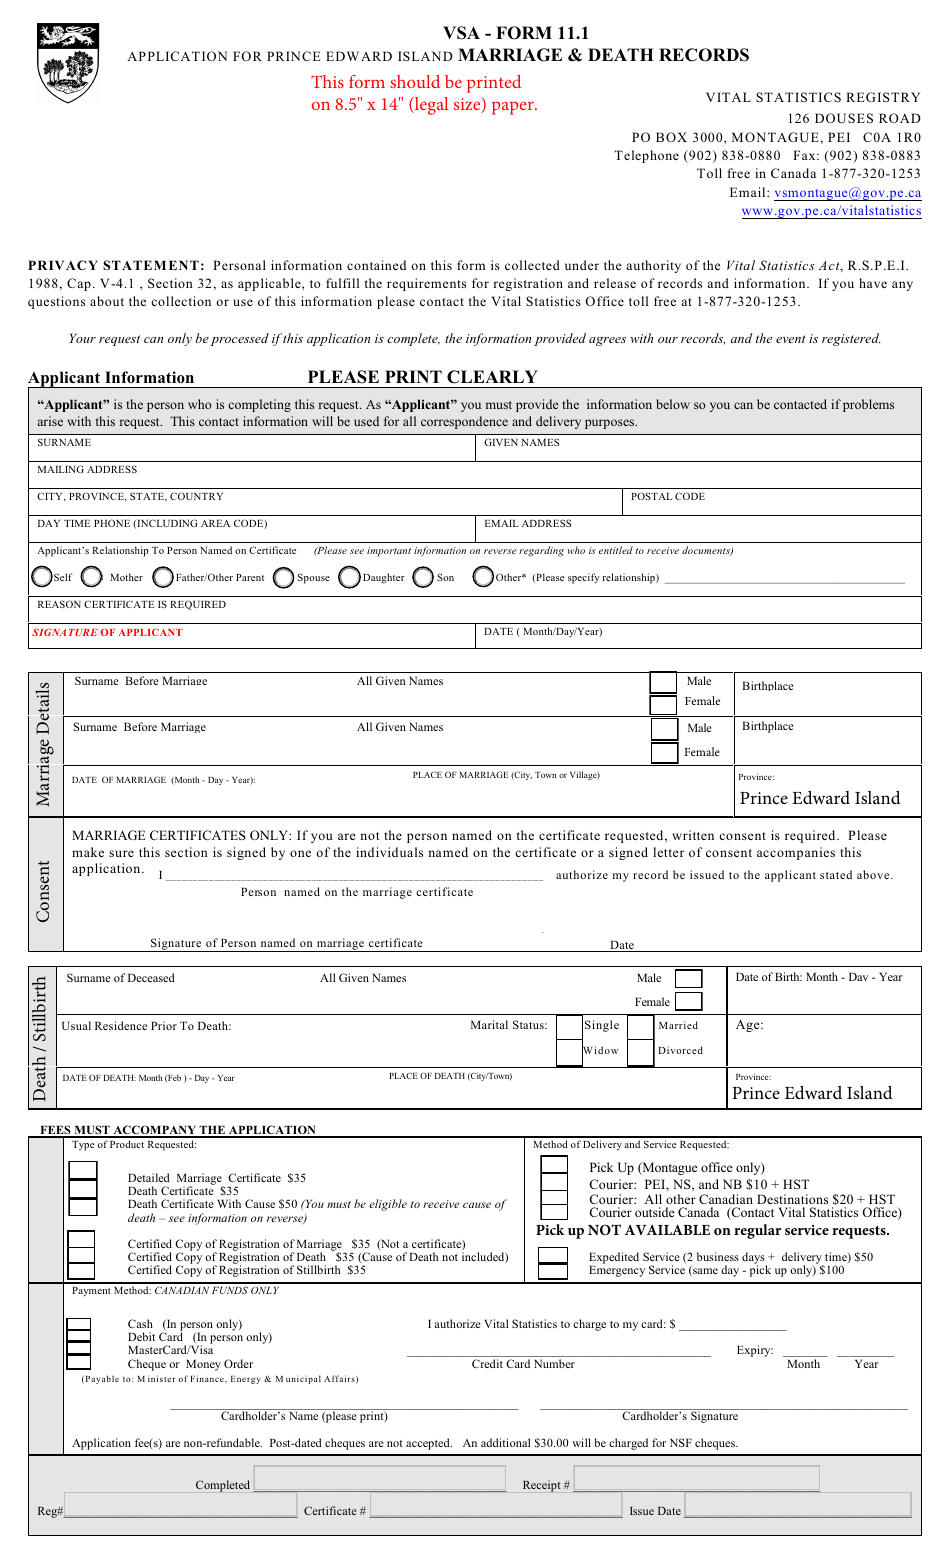 VSA Form 11.1 Application for Prince Edward Island Marriage  Death Records - Prince Edward Island, Canada, Page 1